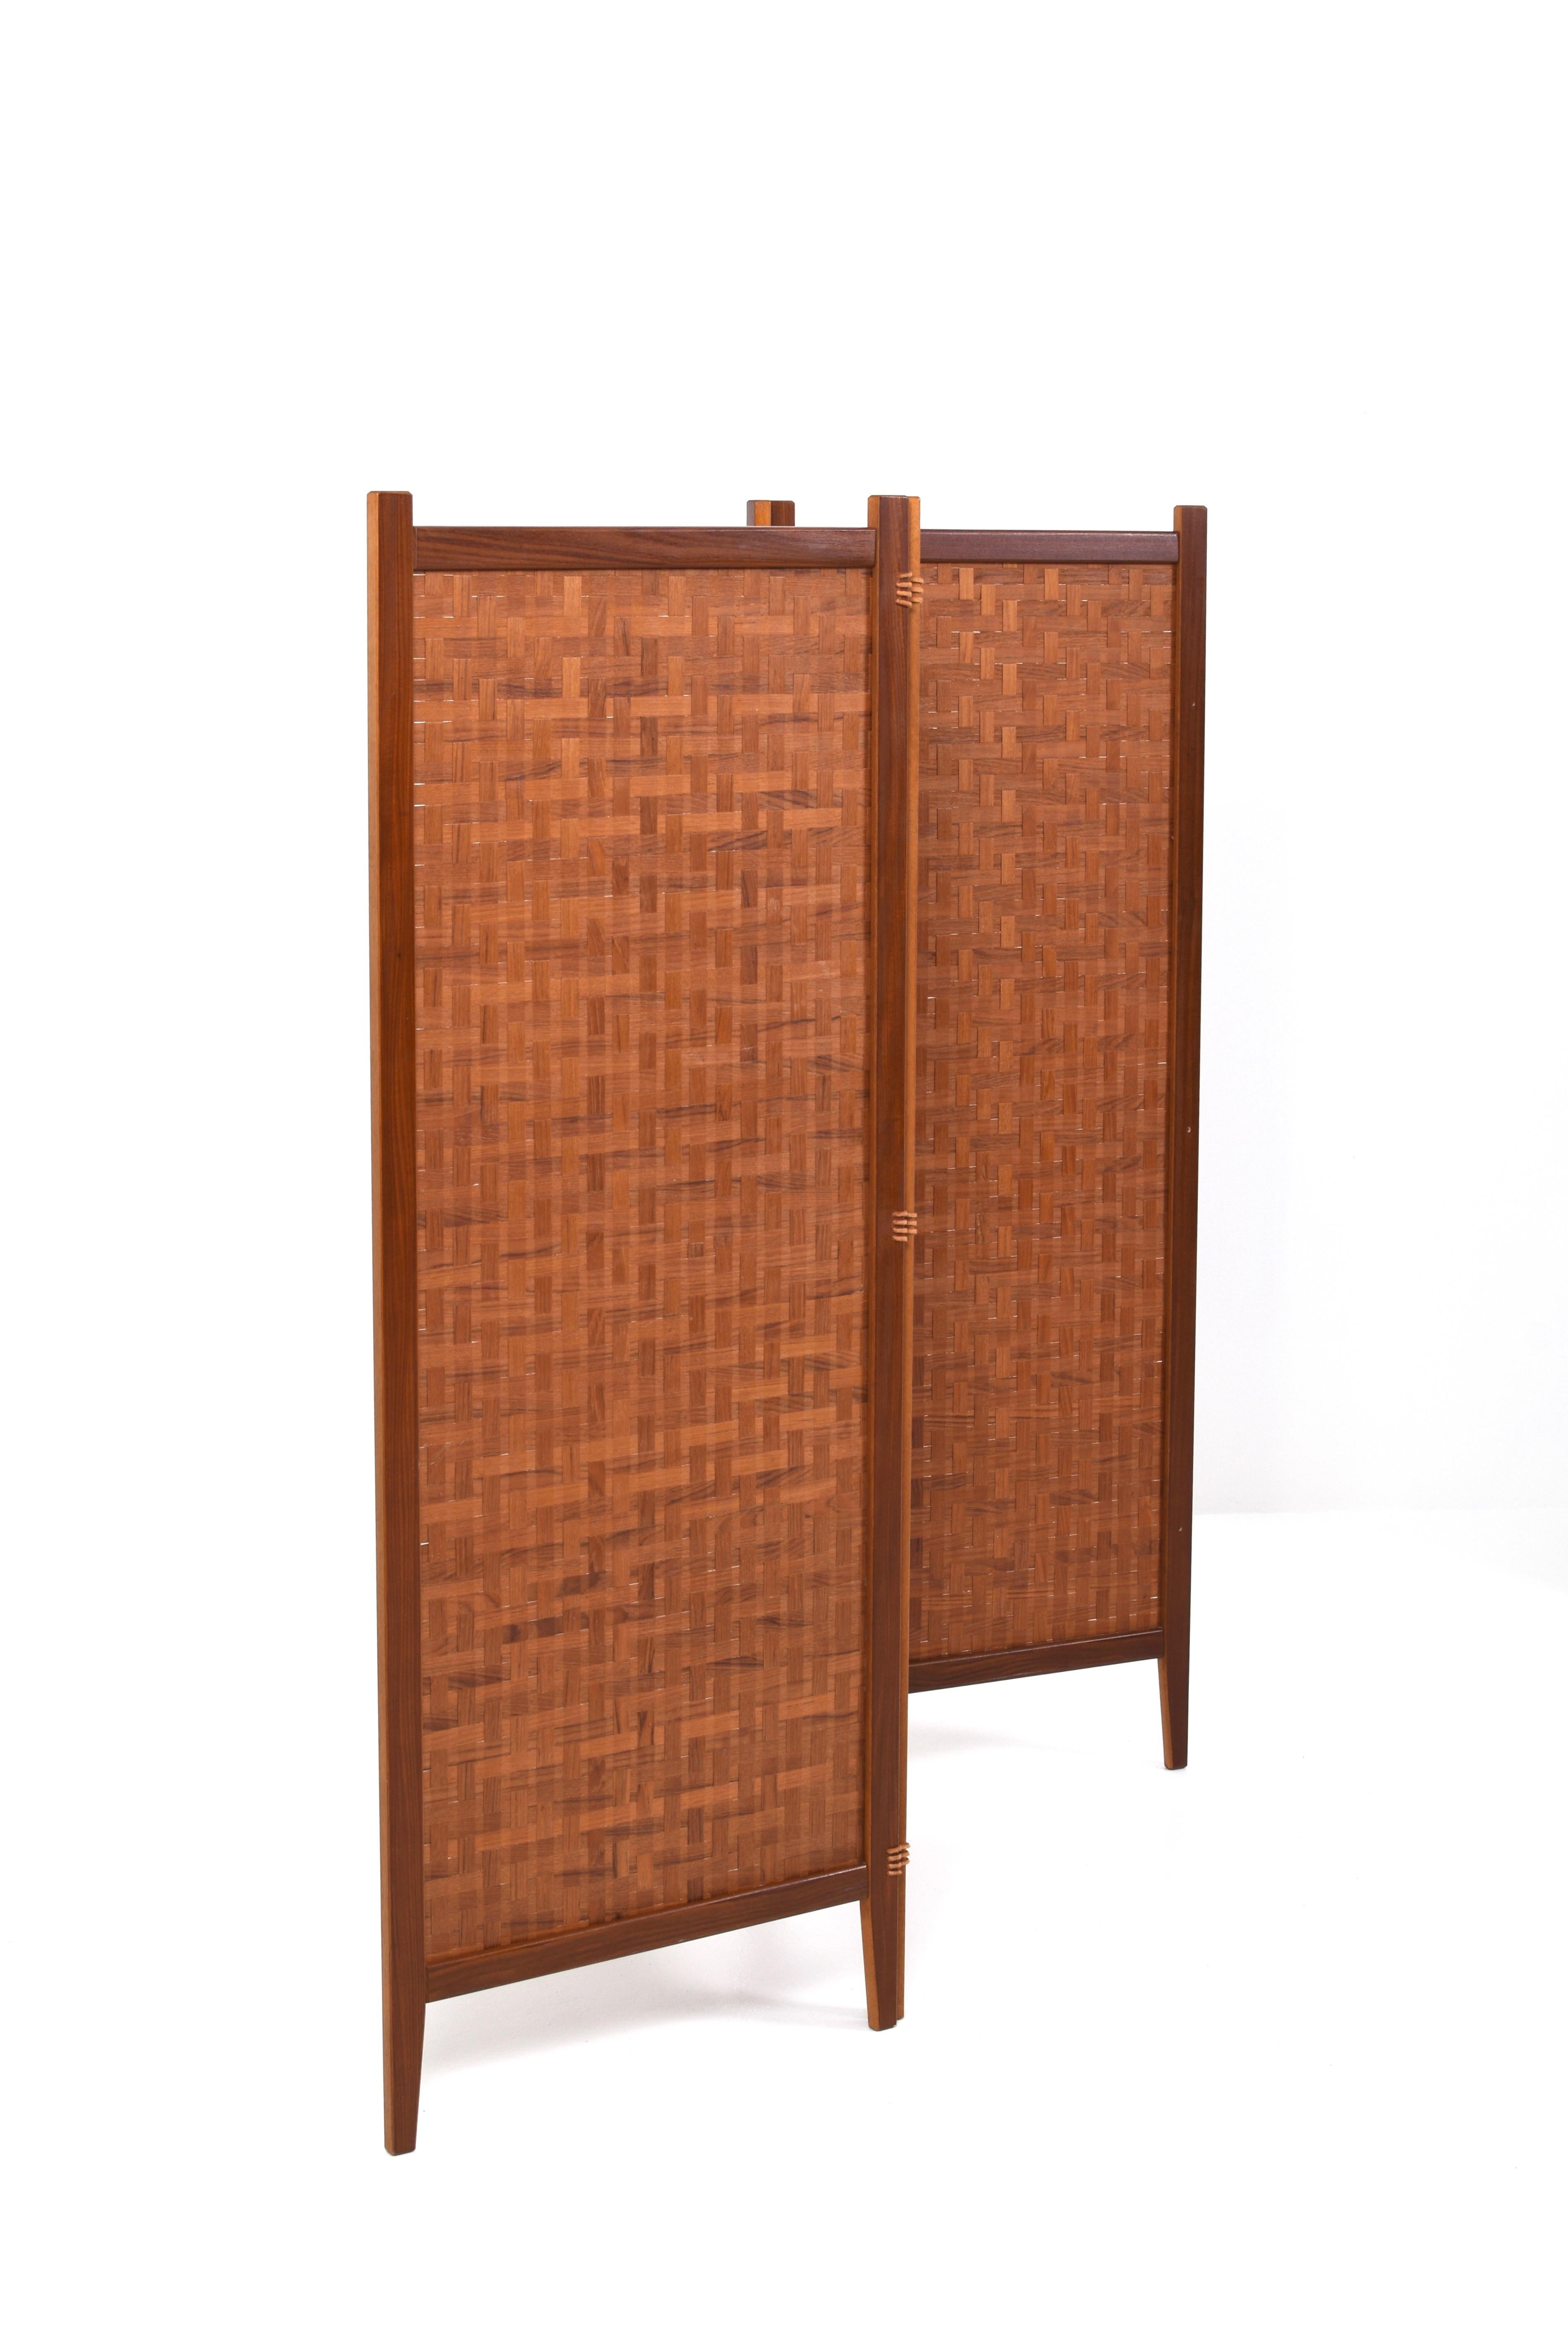 Mid-20th Century Teak and Leather Room Divider Spåna from Alberts Tibro, 1950s For Sale